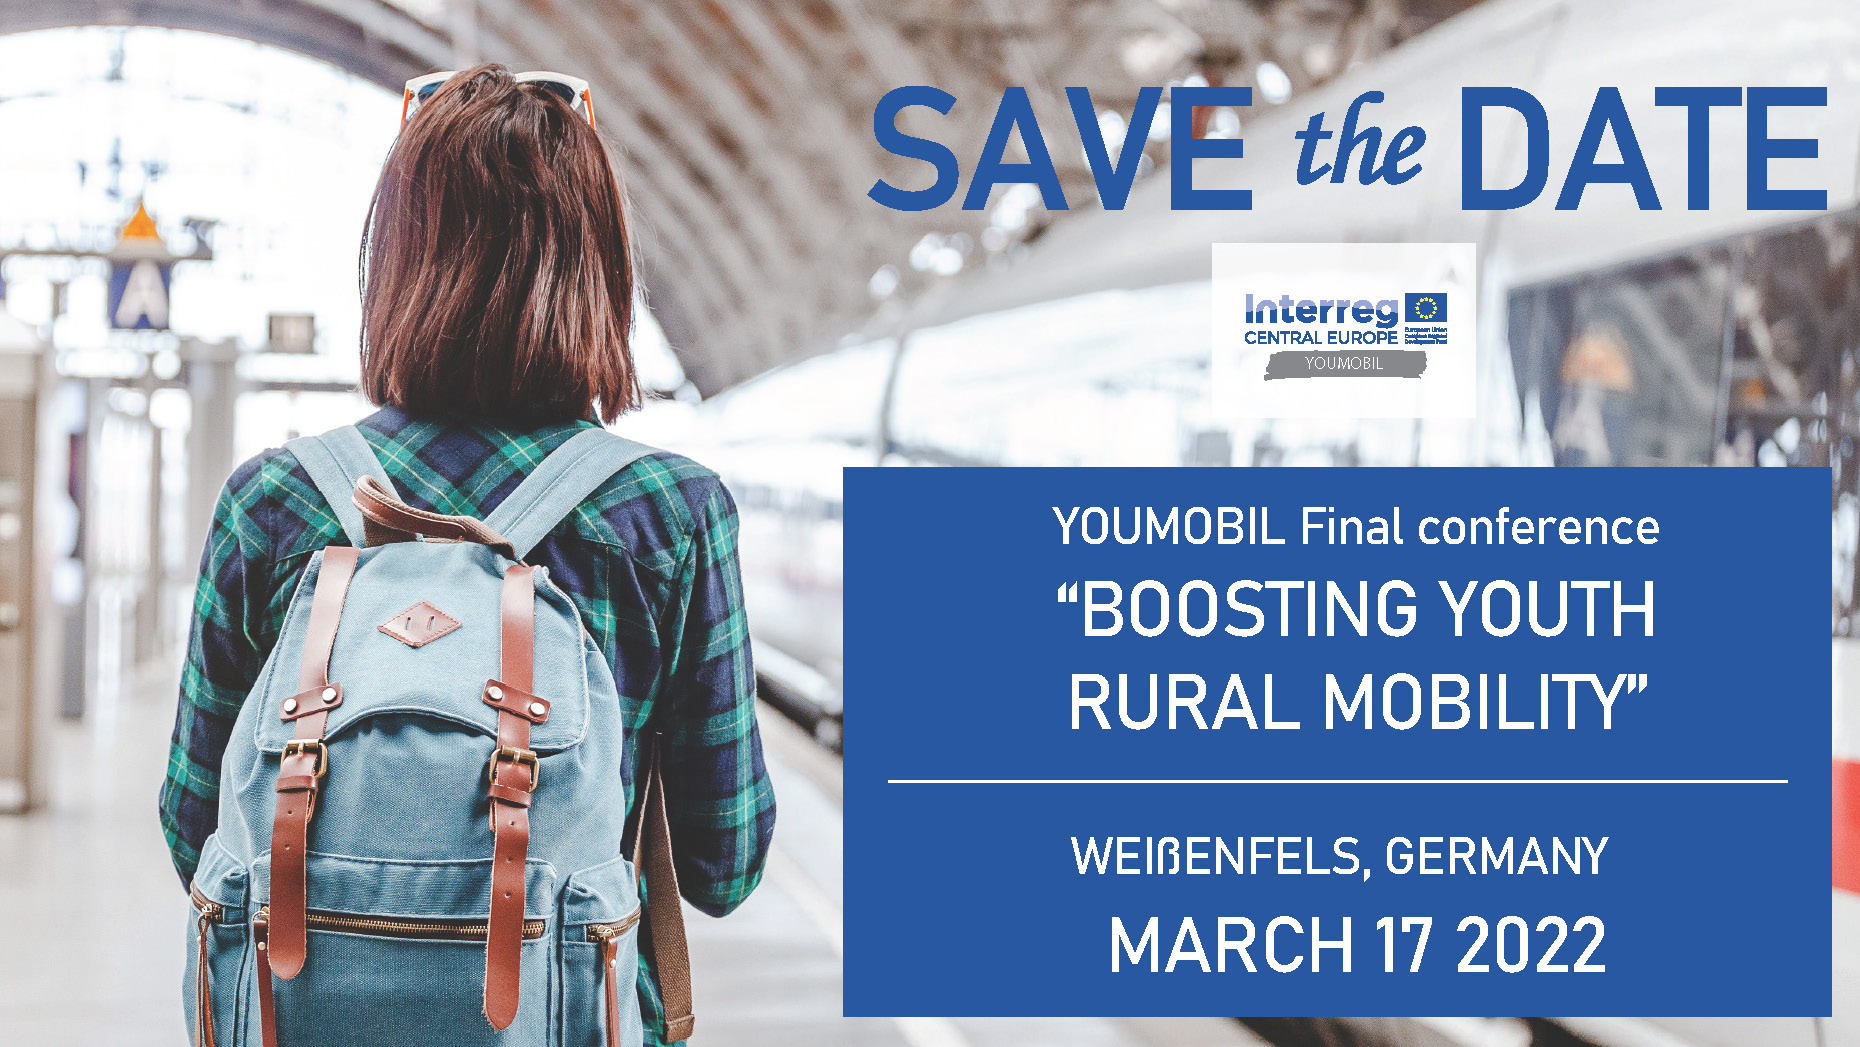 YOUMOBIL Final Conference “Boosting Youth Rural Mobility”